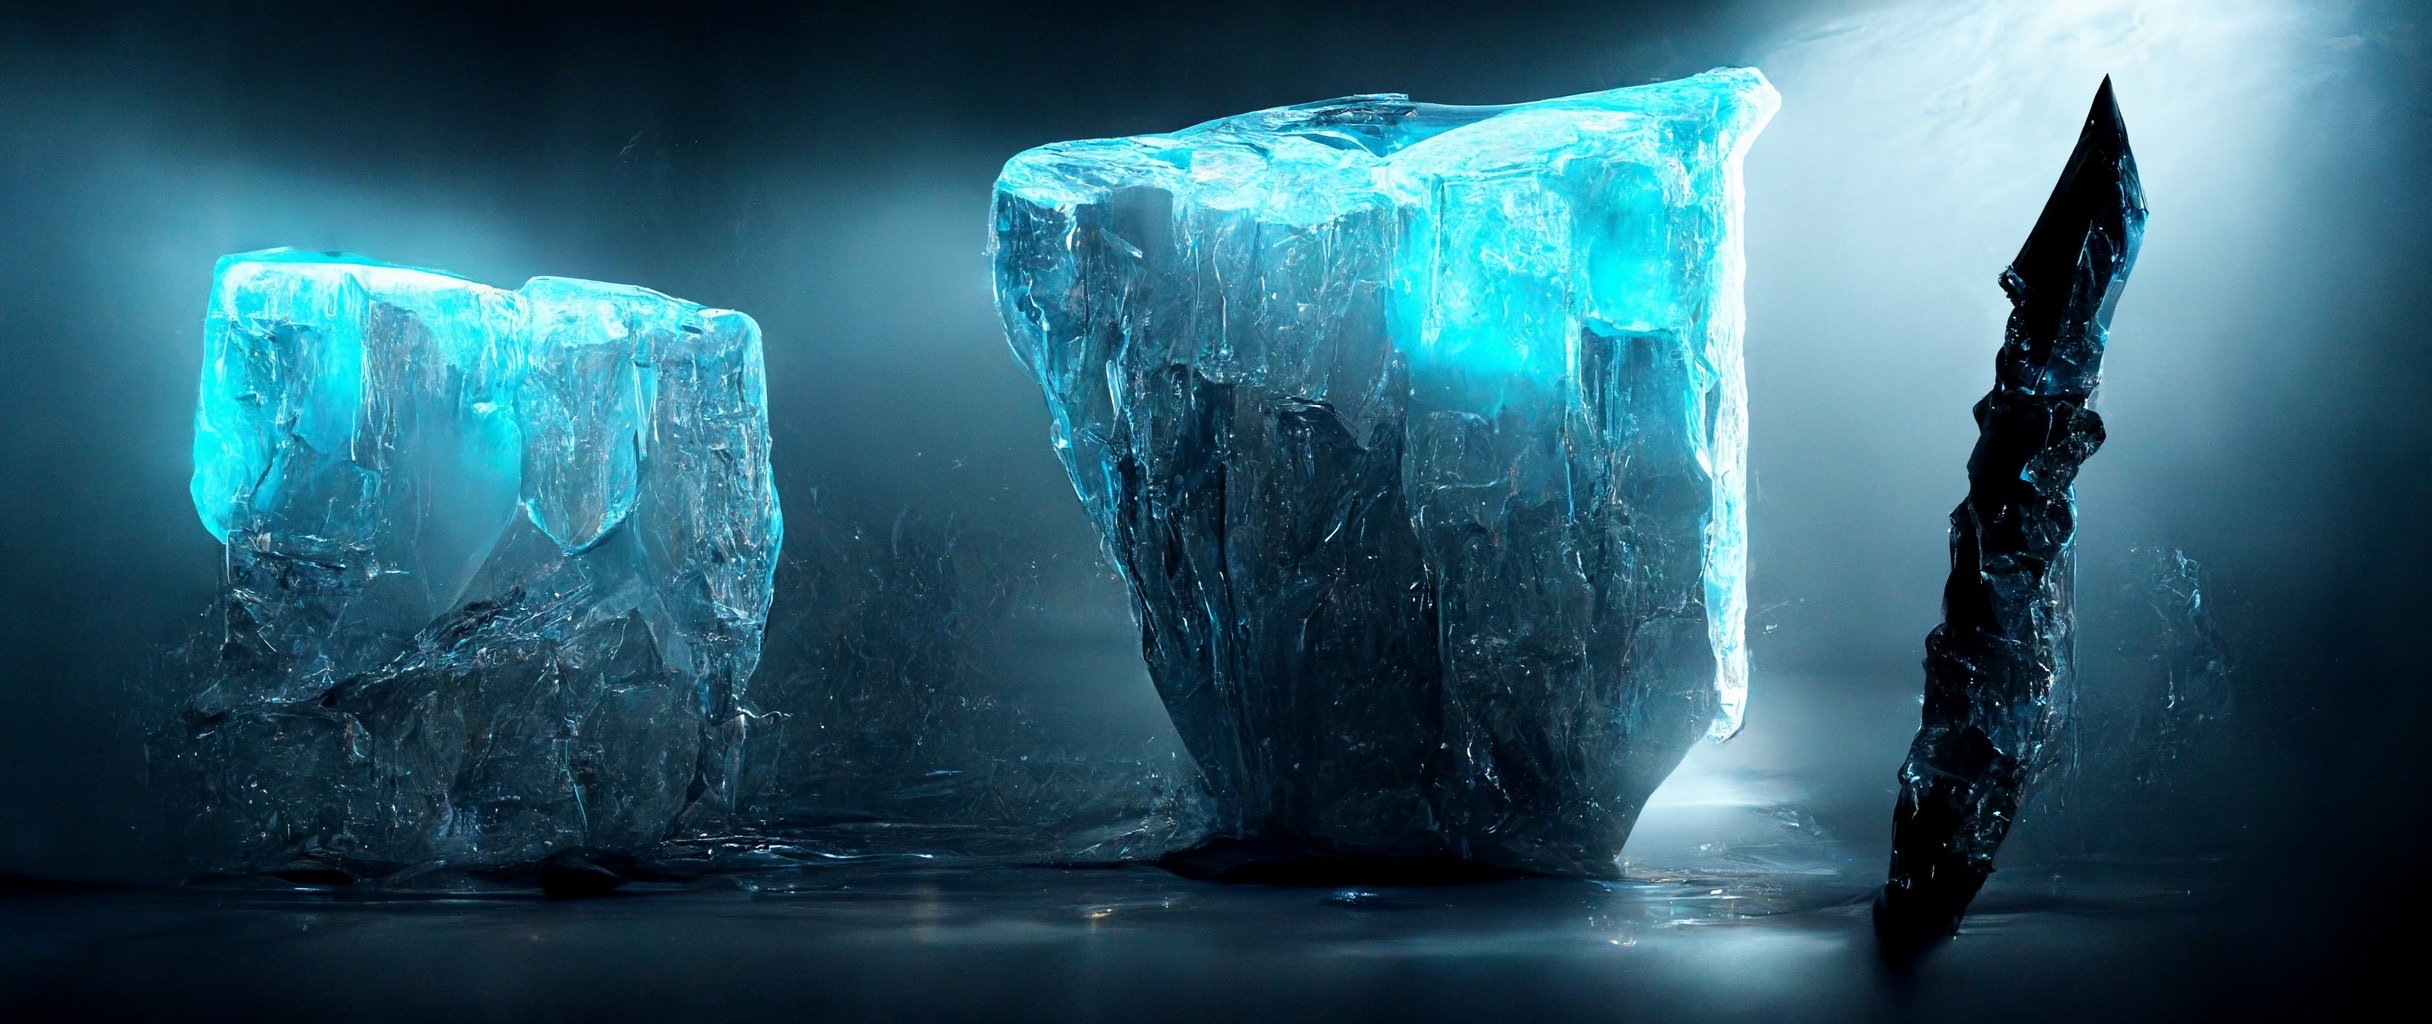 70013dc2-54e8-457a-8159-119857e7a3aa_S3RAPH_frozen_Trident_crystal_in_ice_cave_with_reflective._8k_cinematic_composition_render_w_2048_h_858.JPG